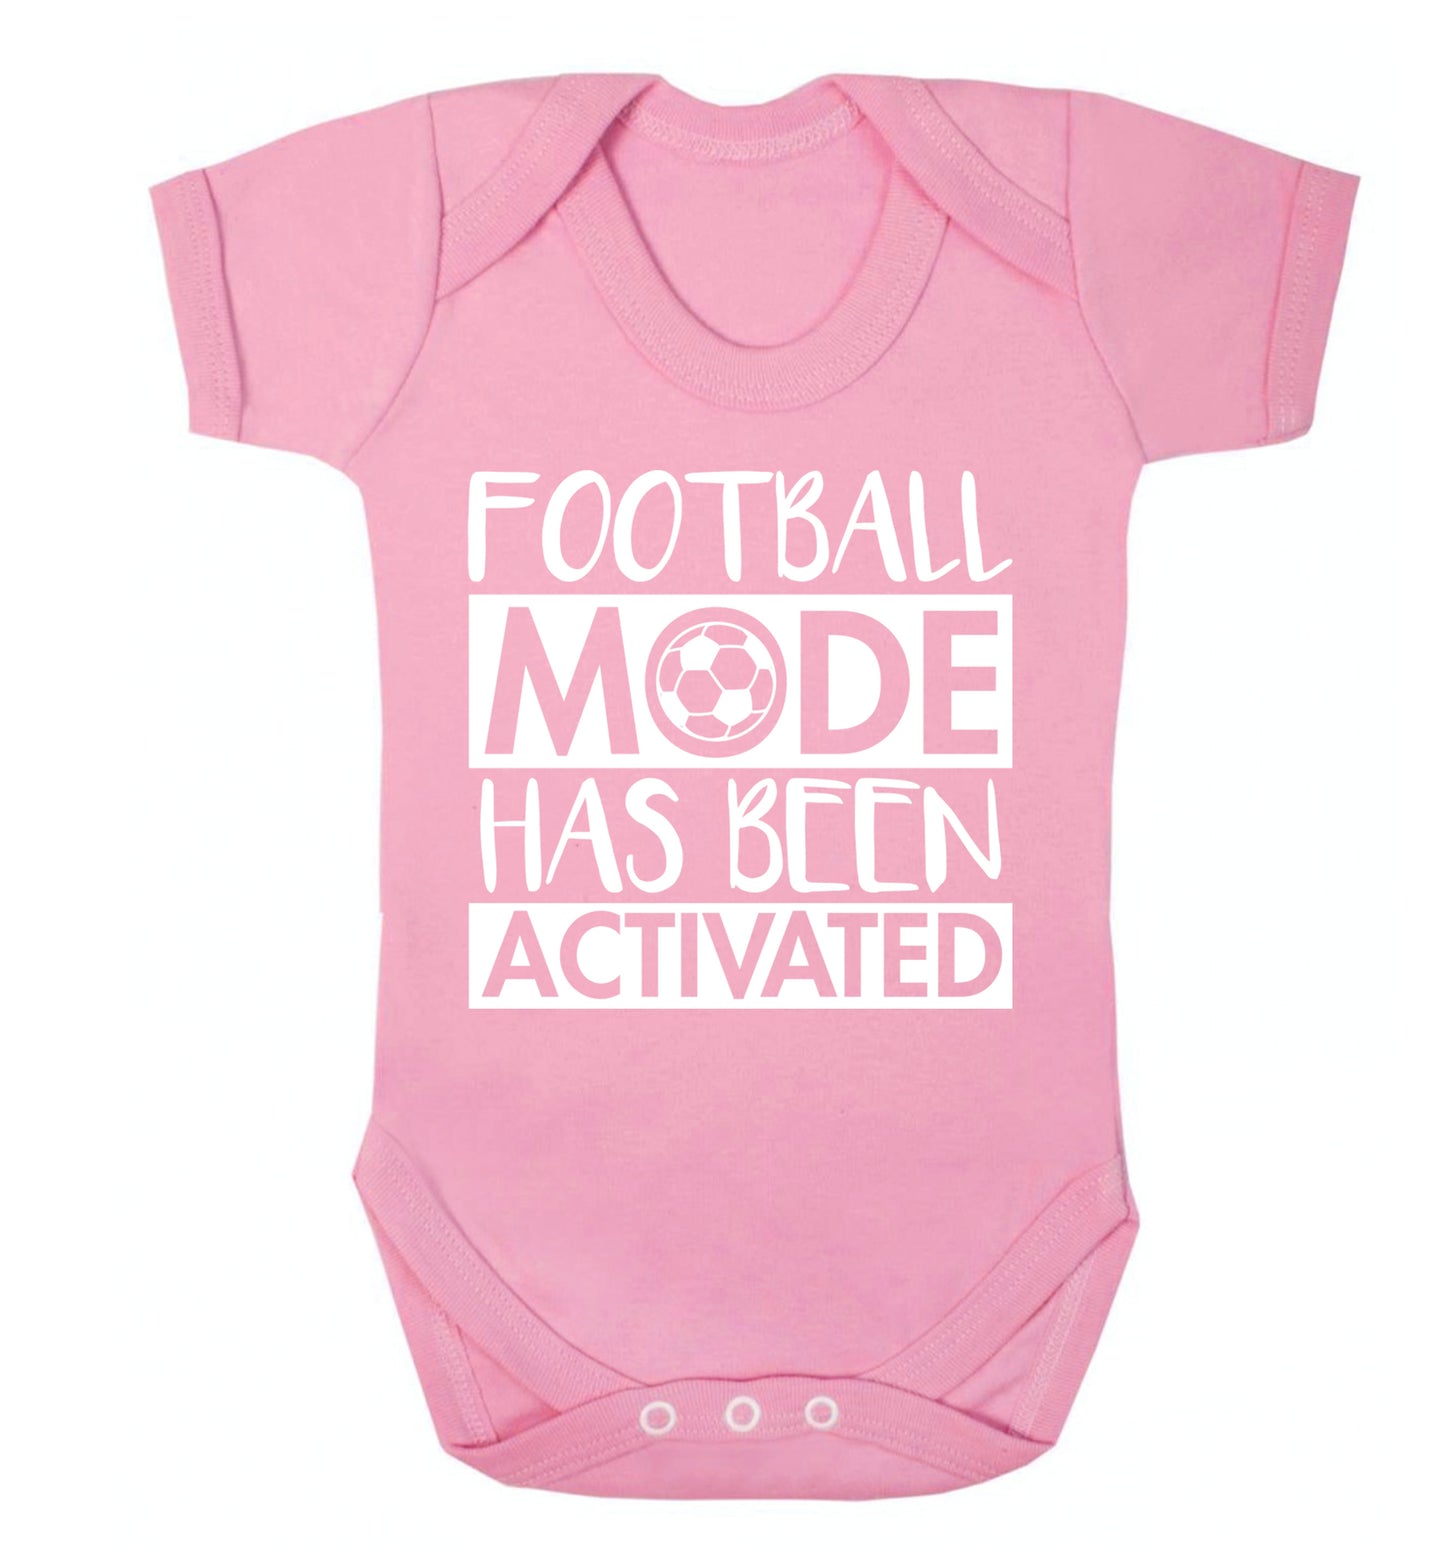 Football mode has been activated Baby Vest pale pink 18-24 months